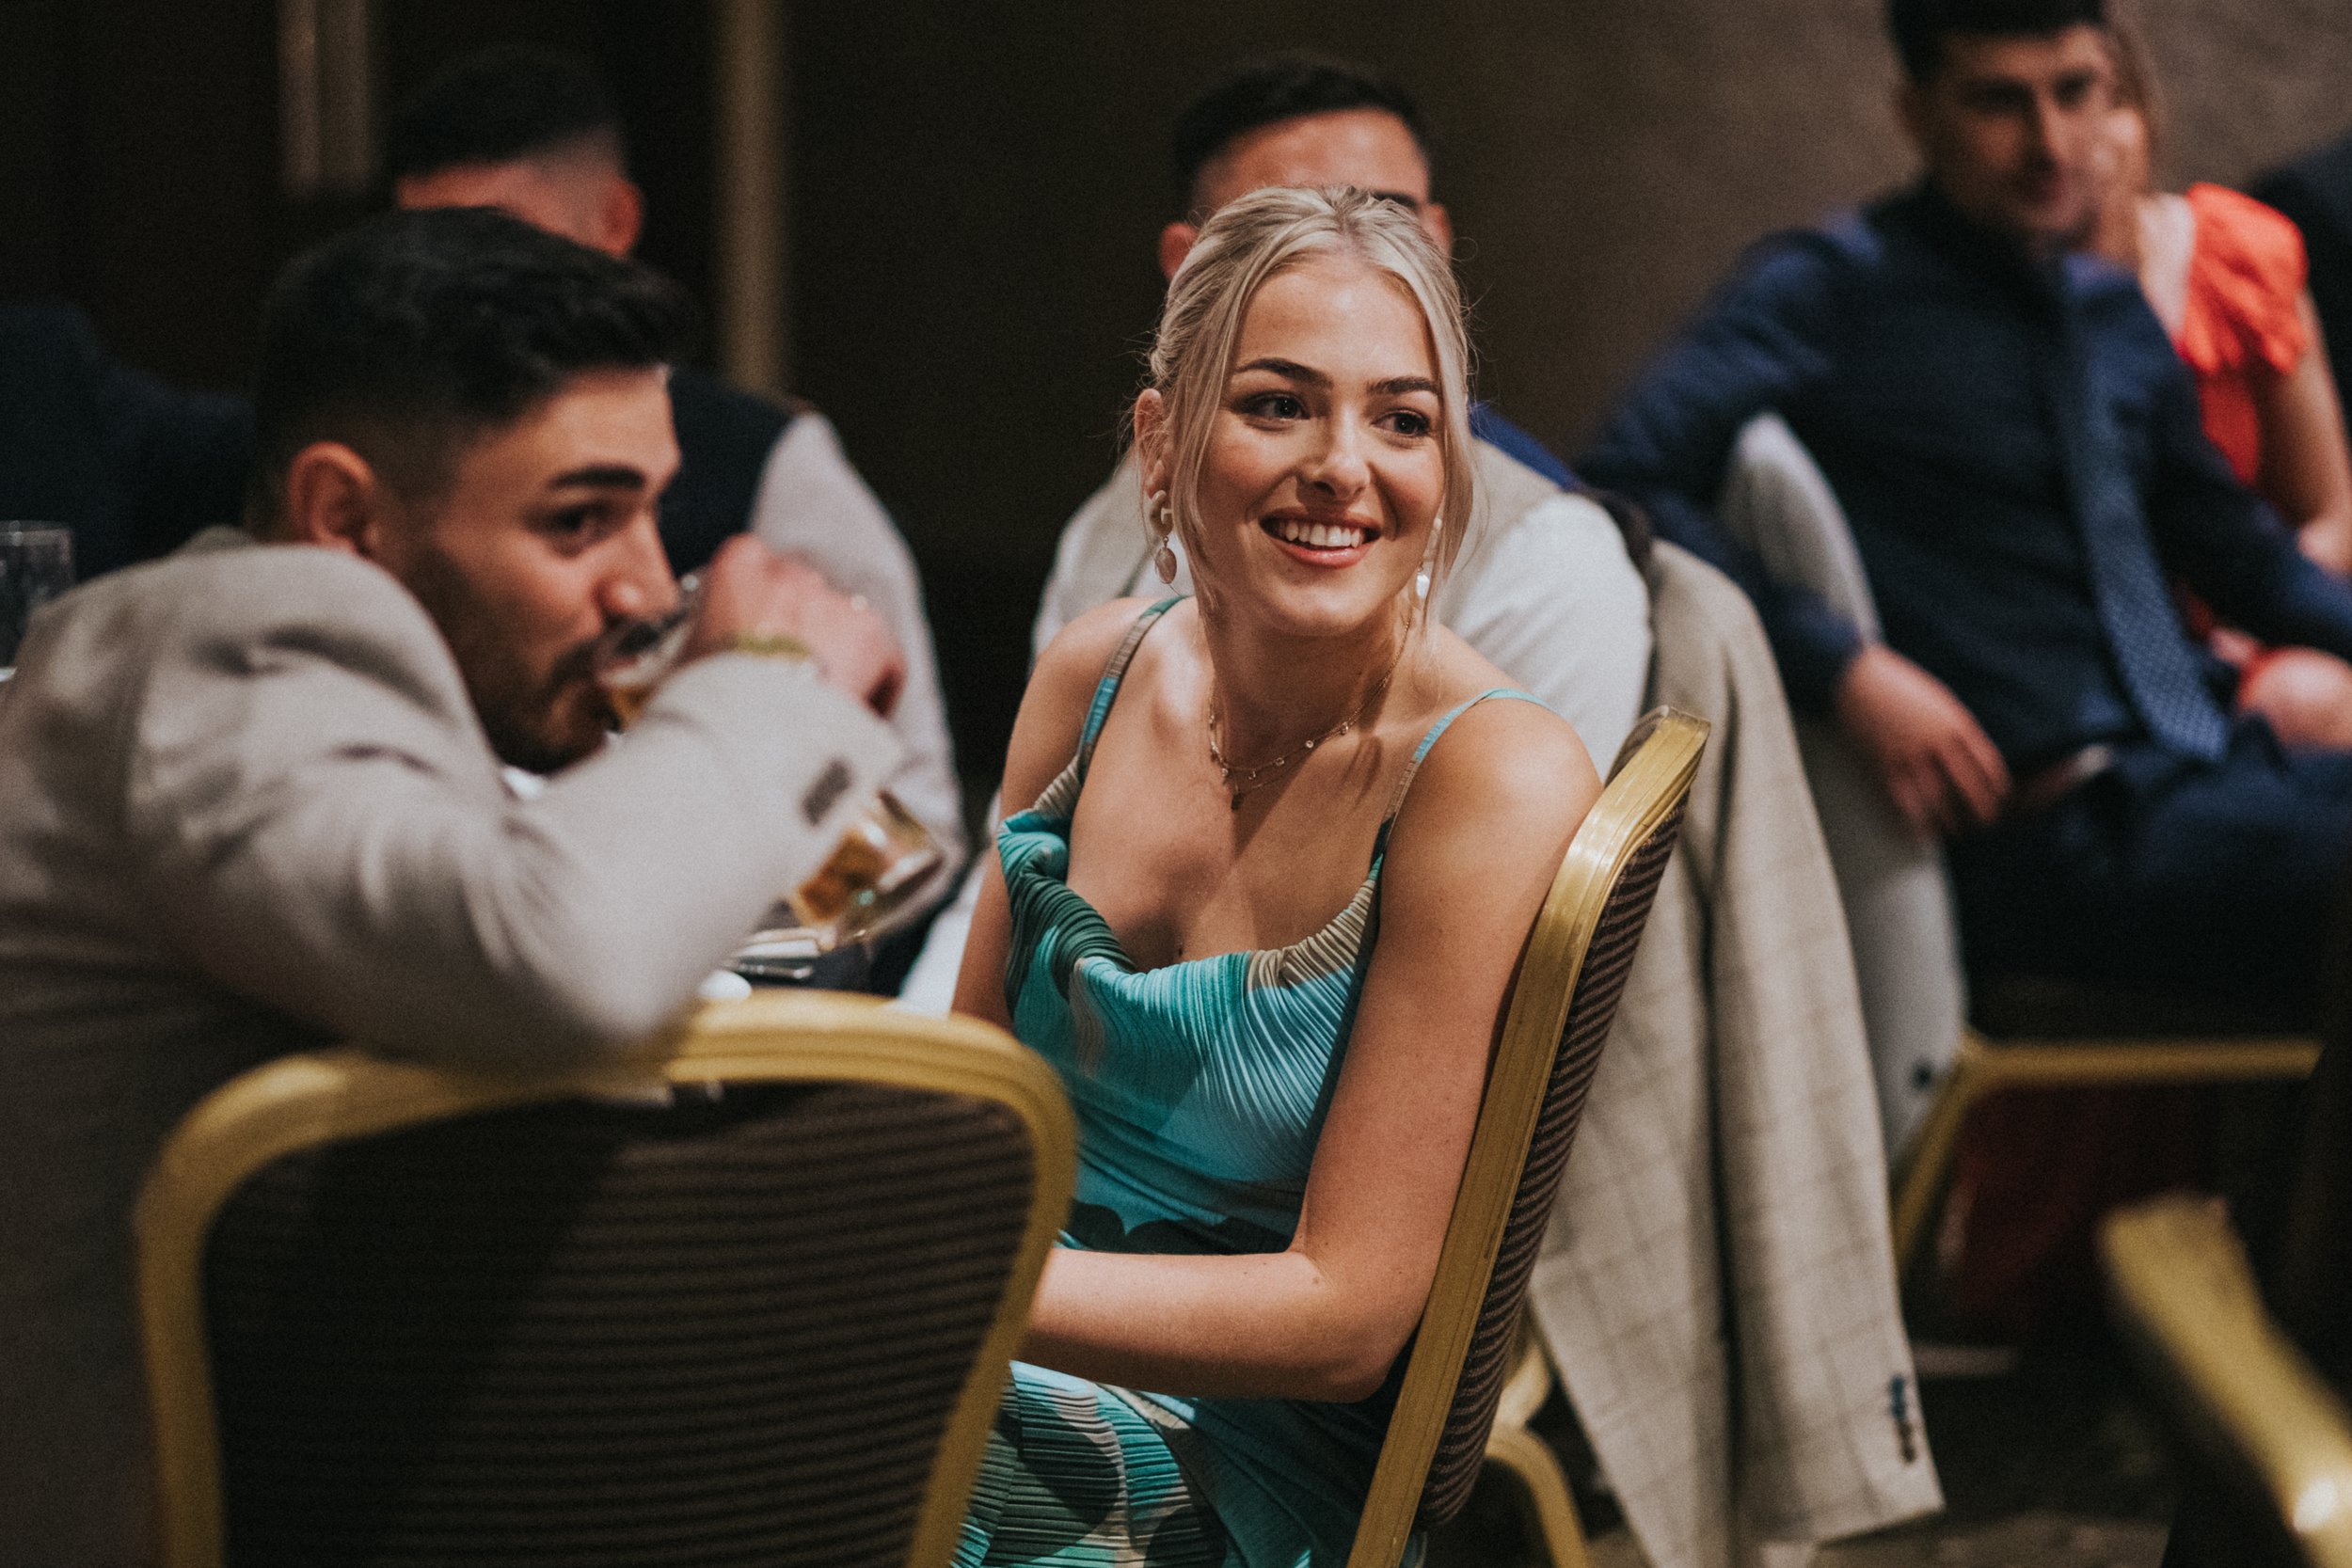 Blonde female wedding guest in blue dress smiles while listening to speeches. 